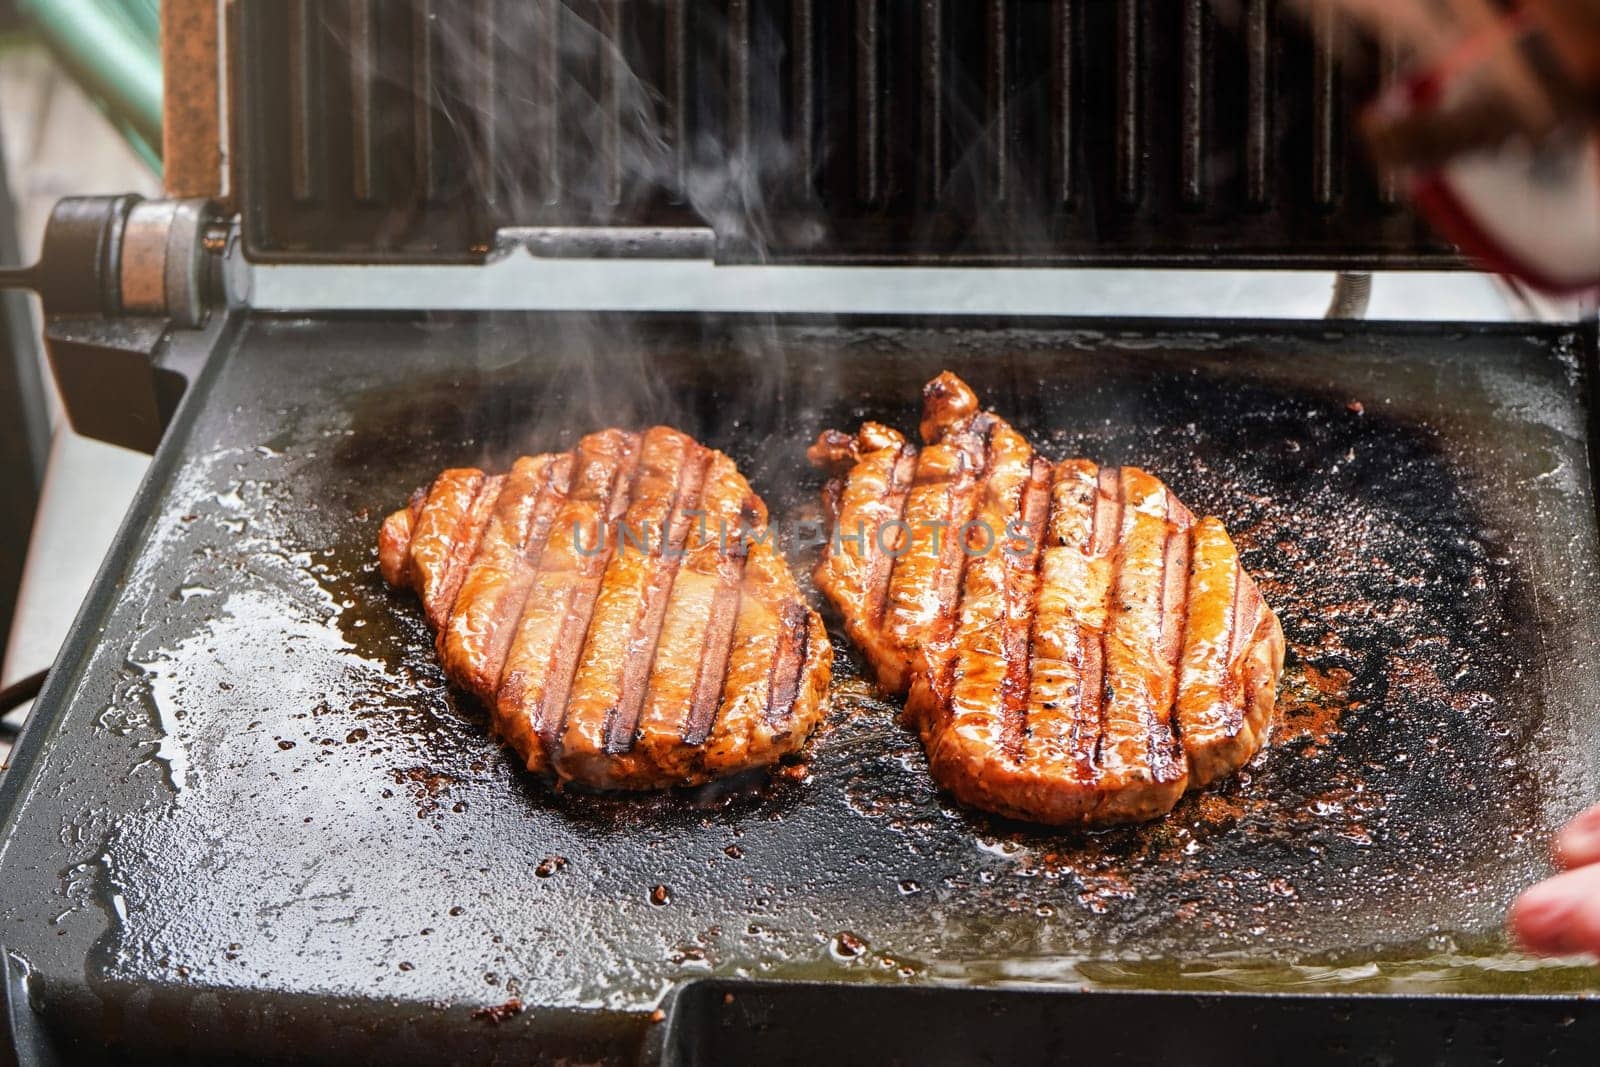 Two pork cutlets steaks grilled on electric grill, smoke visible above cooked meat by Ivanko